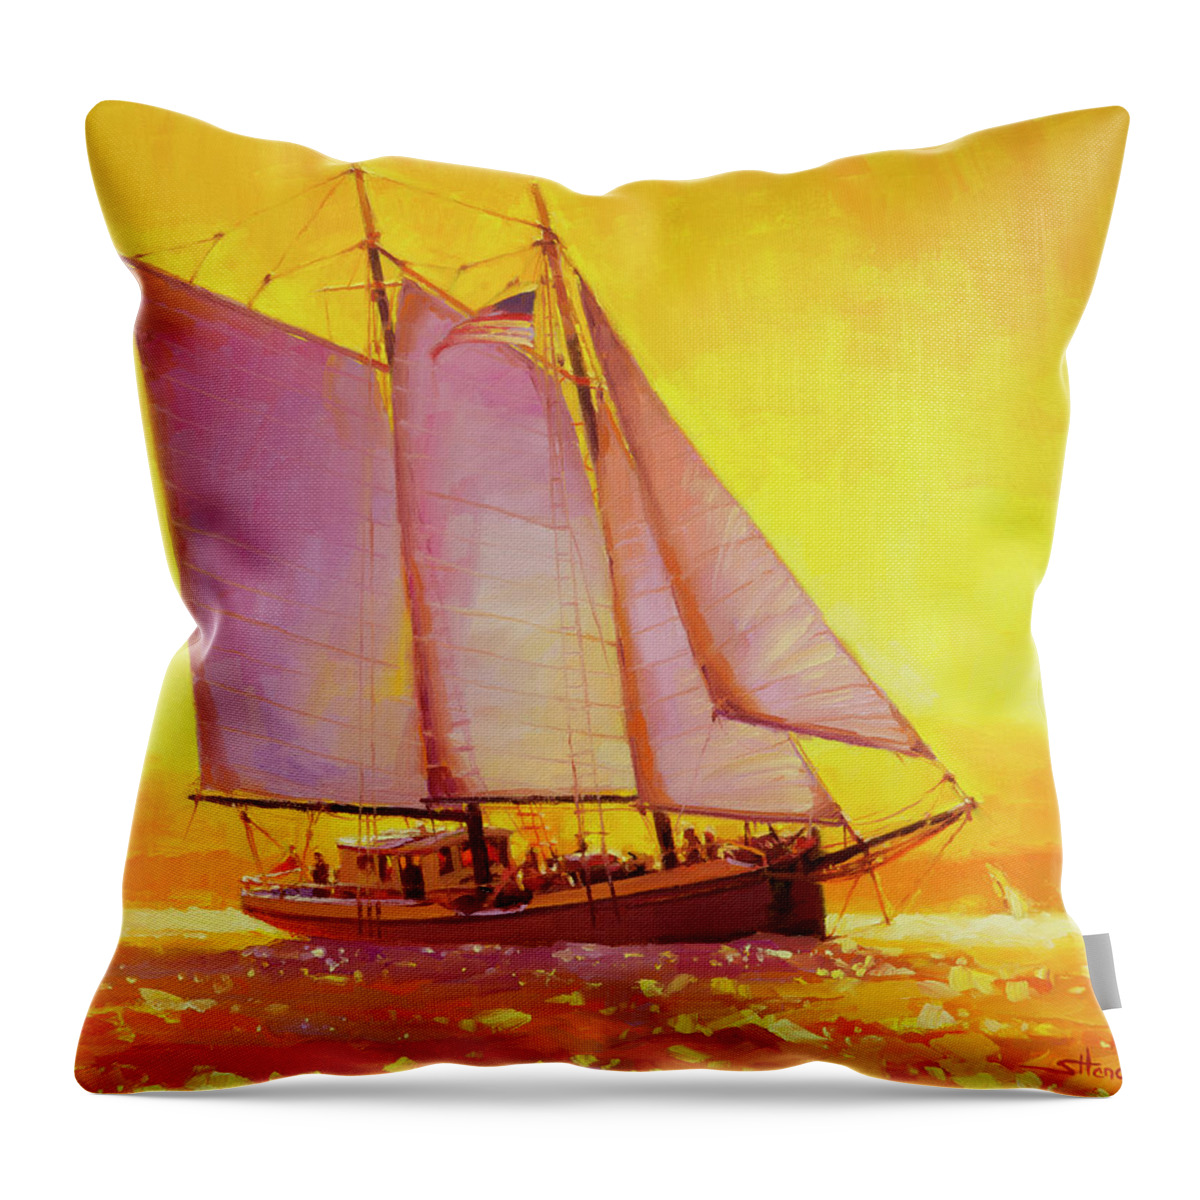 Sail Throw Pillow featuring the painting Golden Sea by Steve Henderson